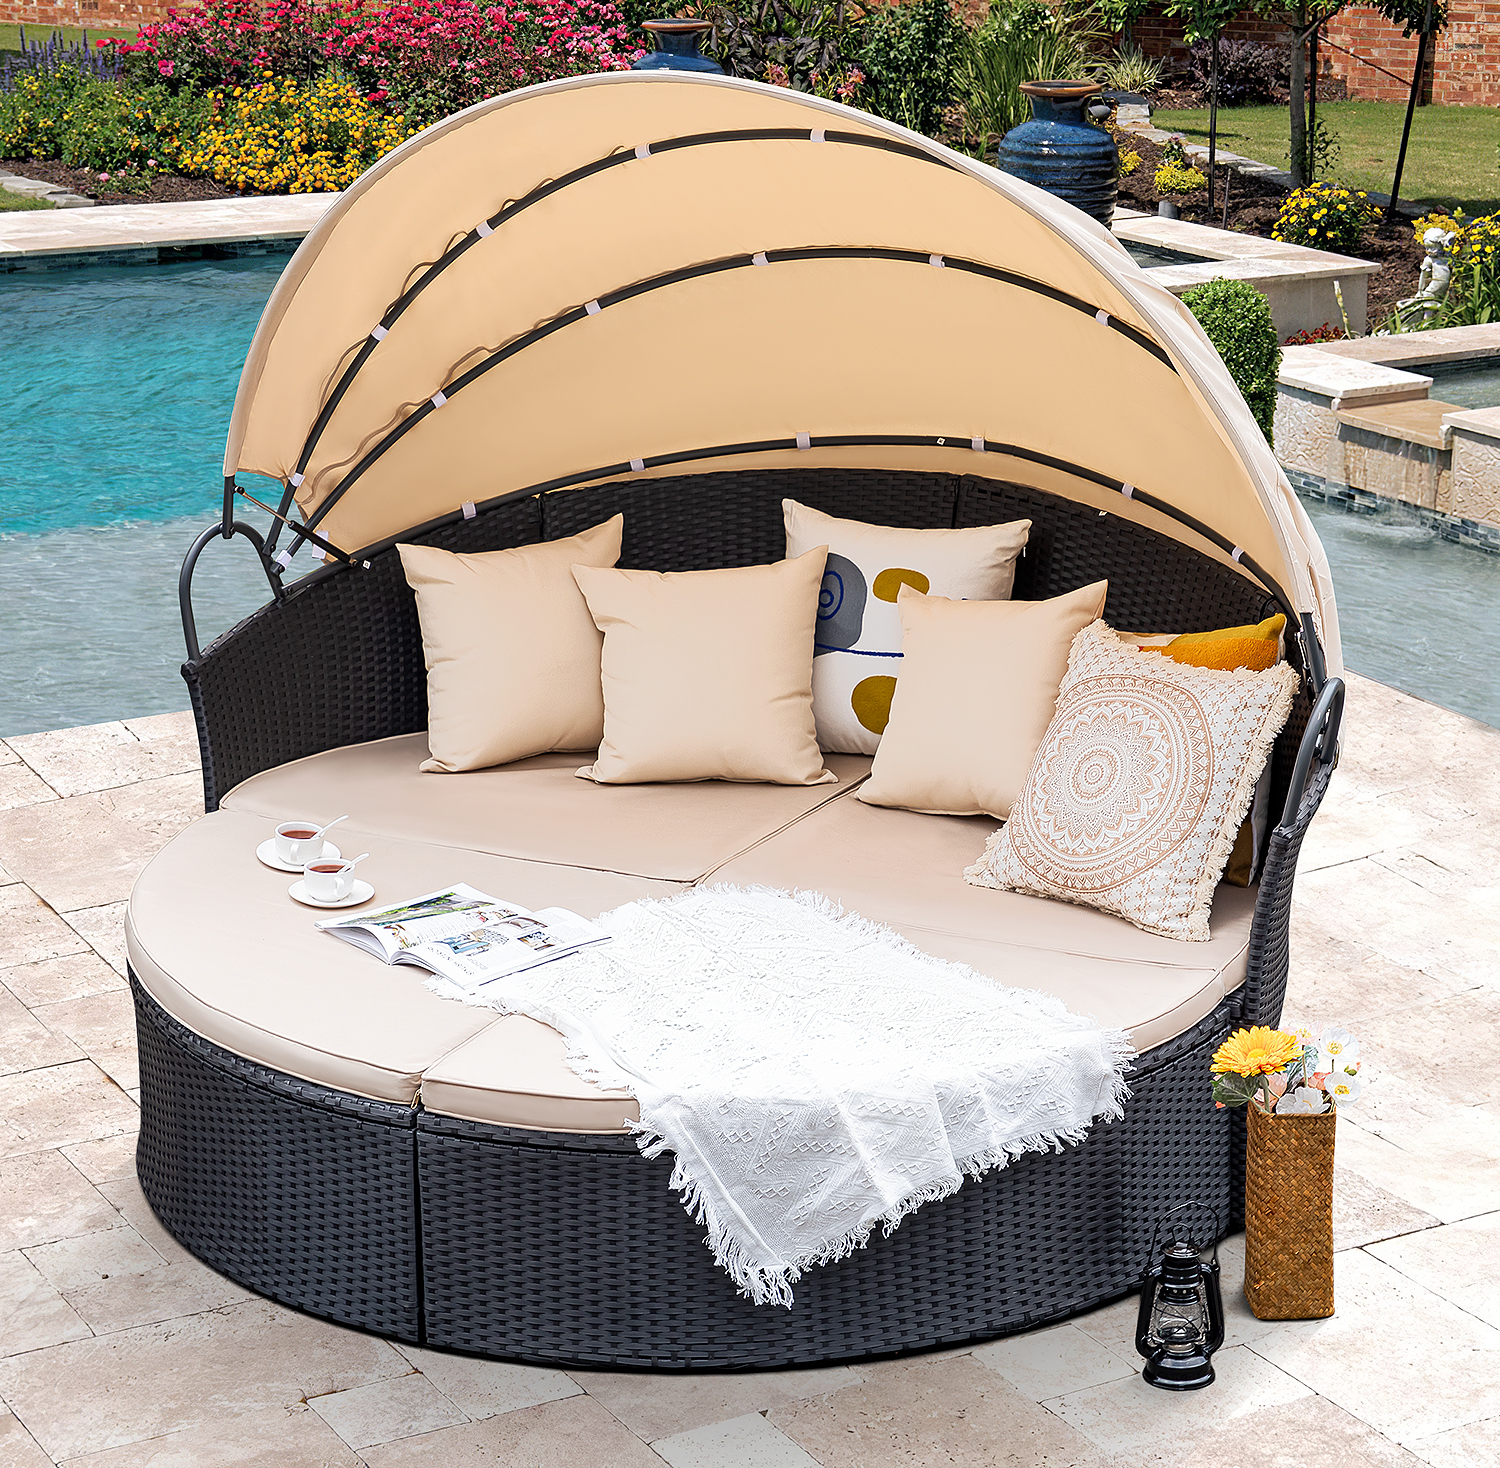 Homall Outdoor Daybed with Retractable Canopy Sectional Rattan Round Bed for Patio, Black & Beige - image 1 of 7